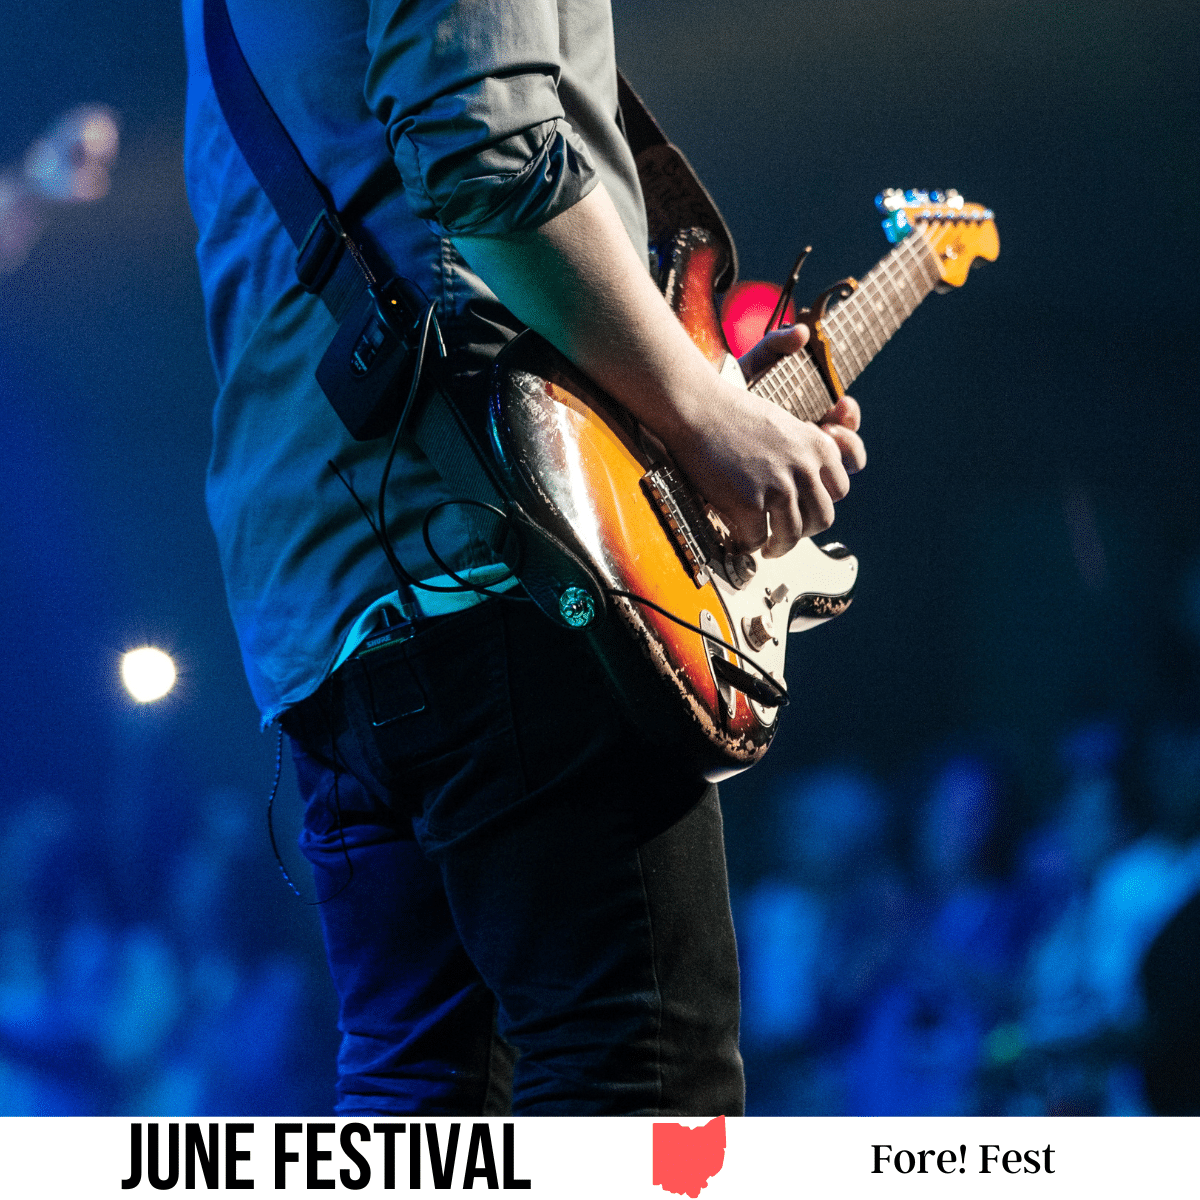 A square image of a close-up photo of a person playing guitar on stage. A white strip across the bottom has text June Festival Fore!Fest.